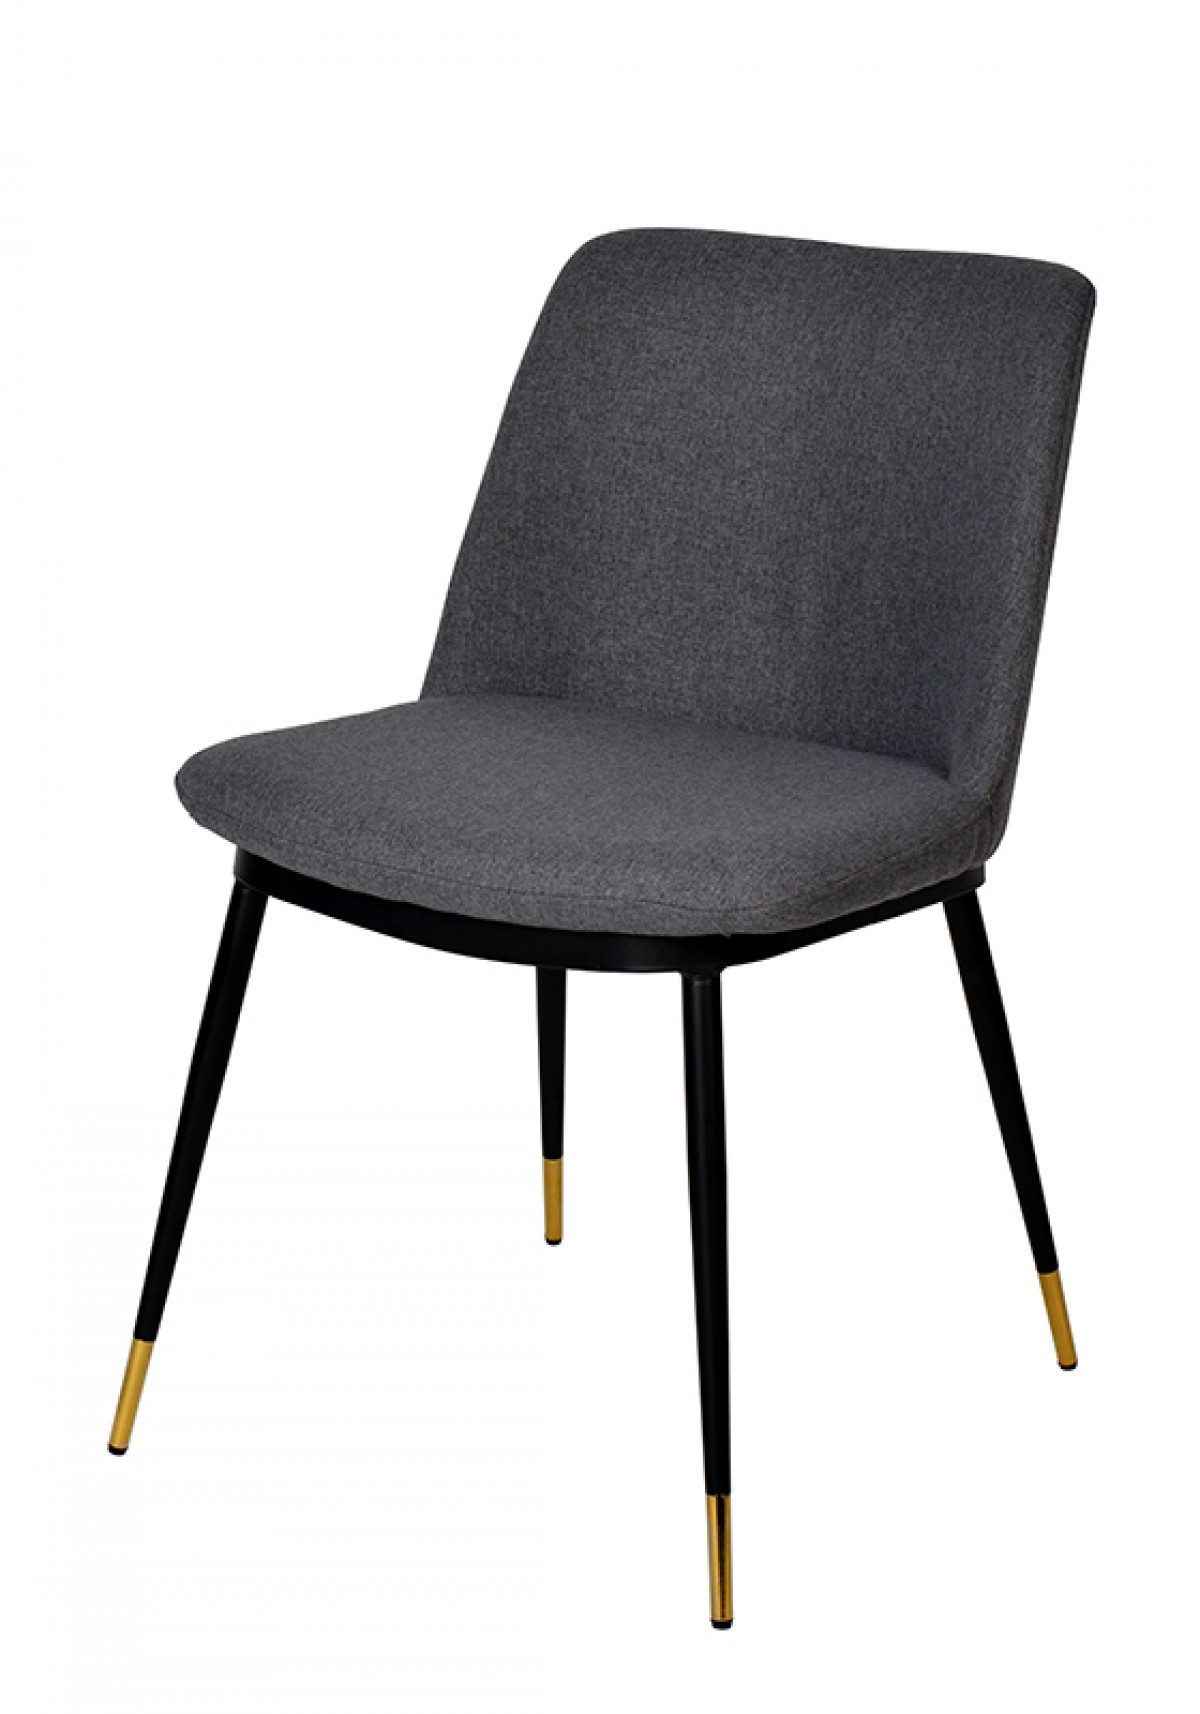 Set of Two Gray Black Dining Chairs